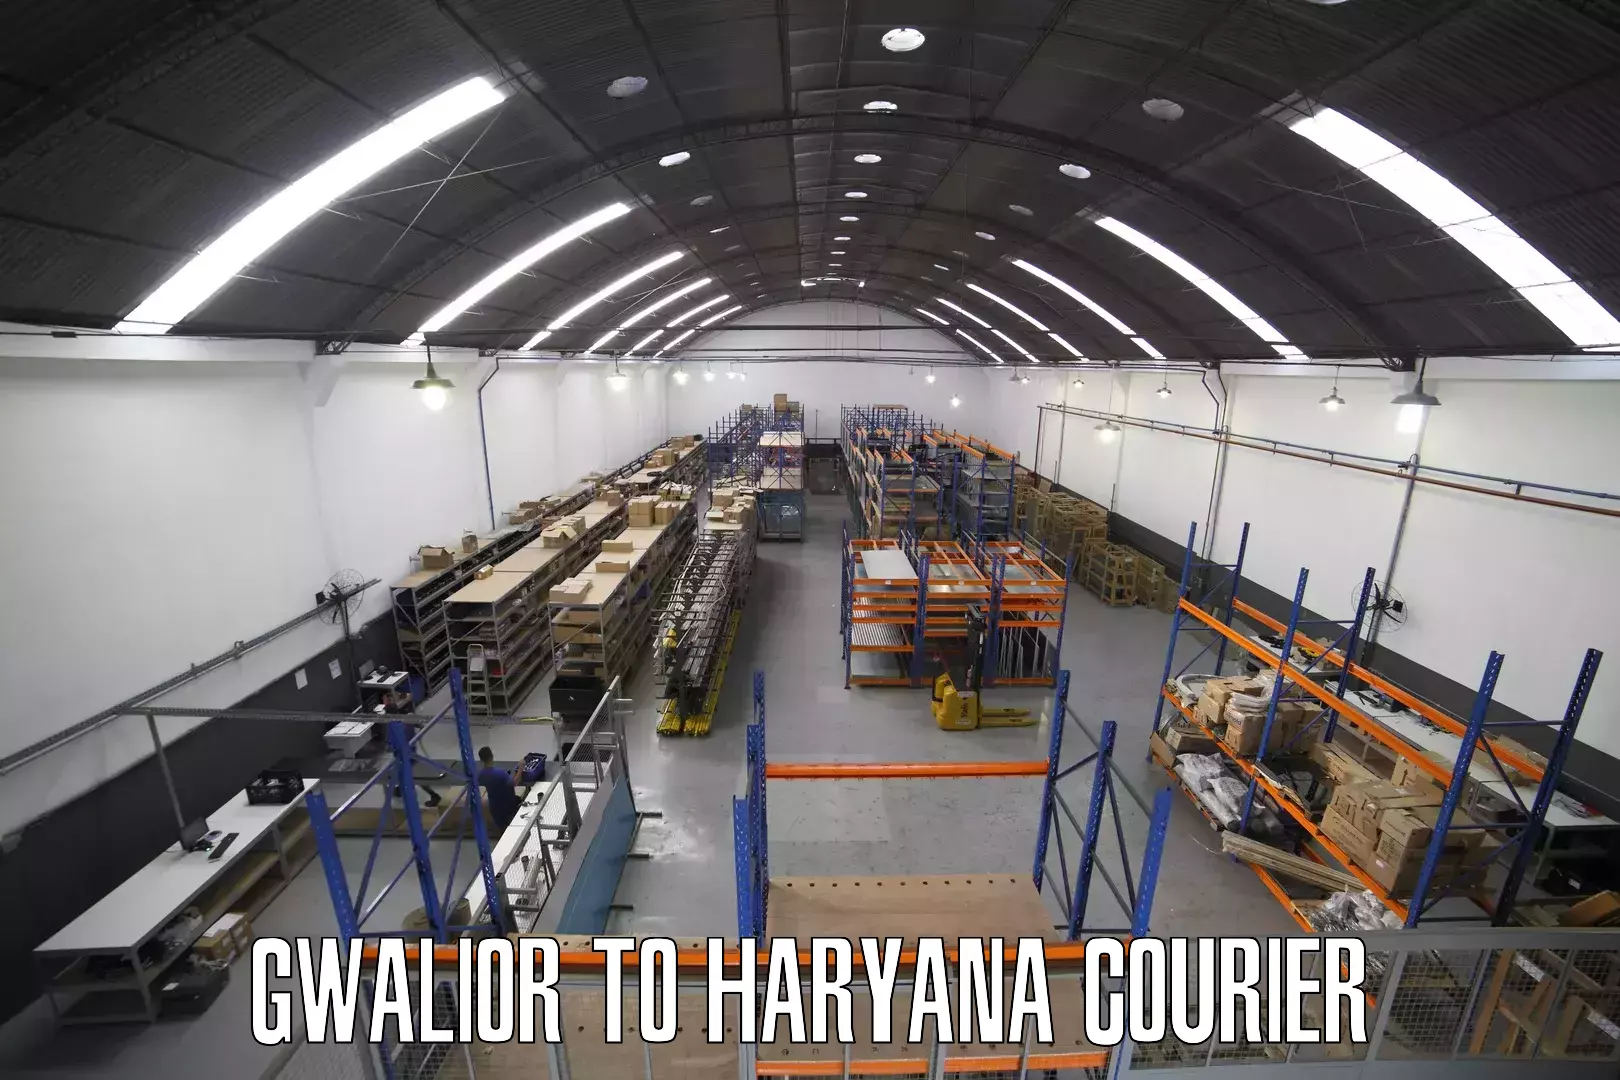 High-priority parcel service Gwalior to Haryana